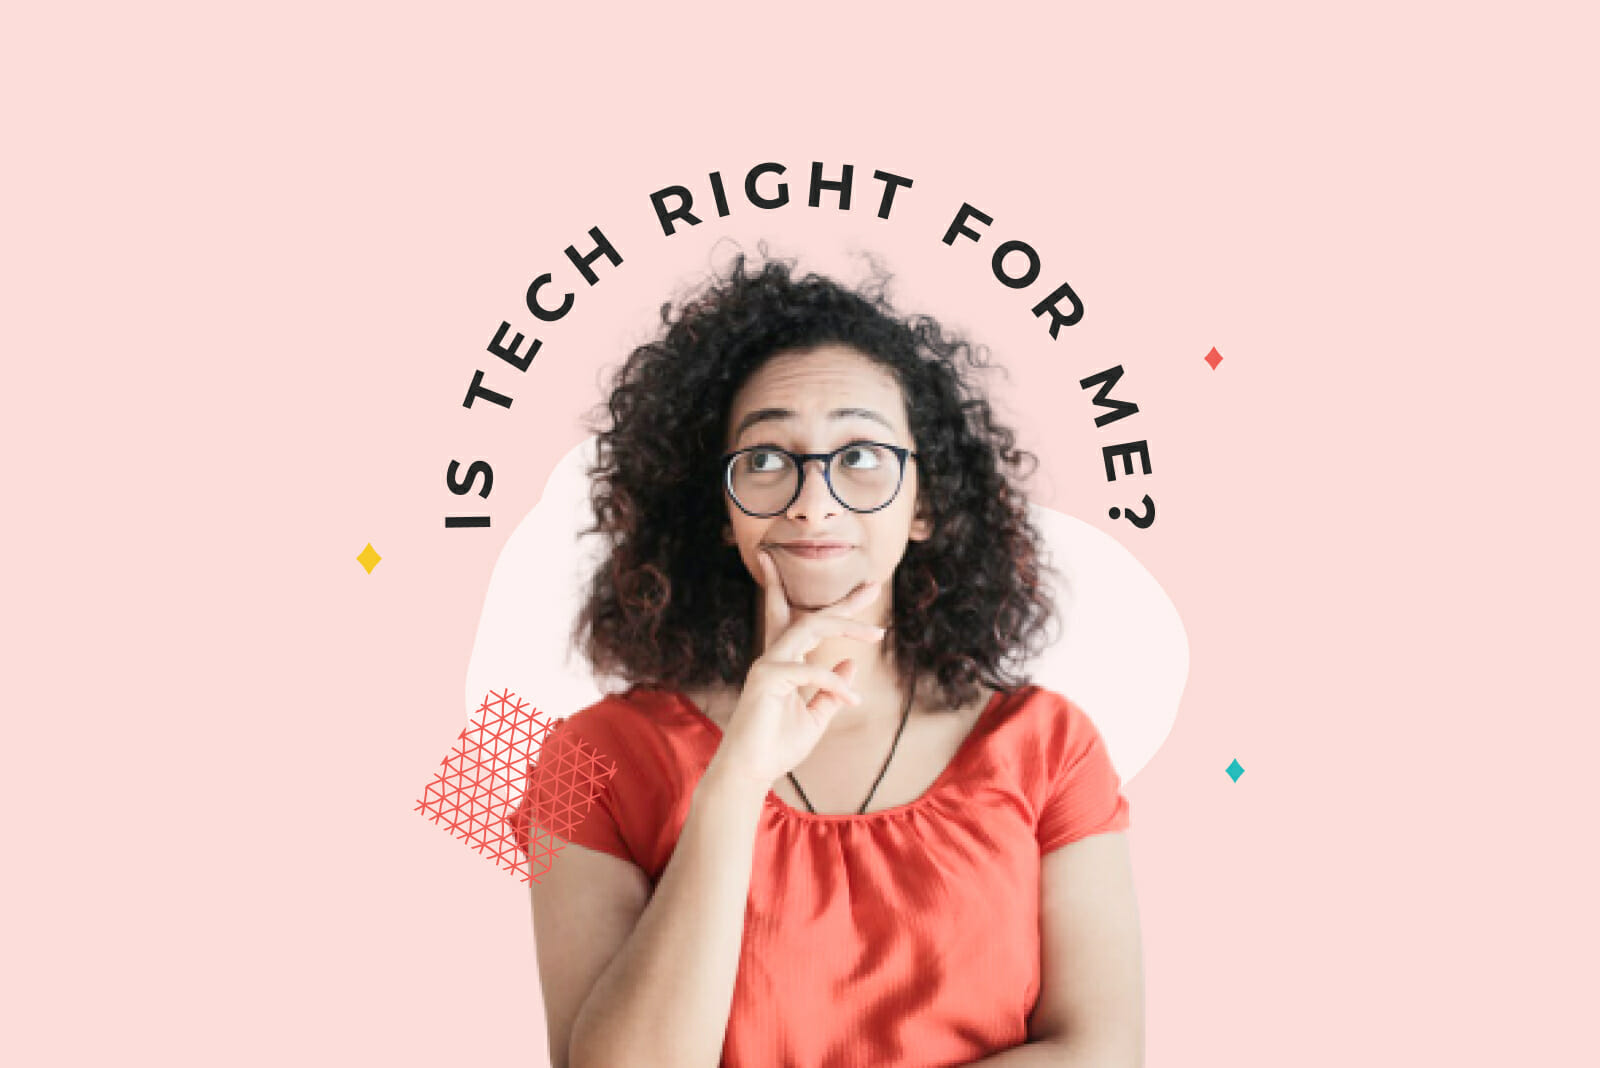 Girl in pink shirt with curly hair and glasses has hand ponders whether tech is right for her against a pink background